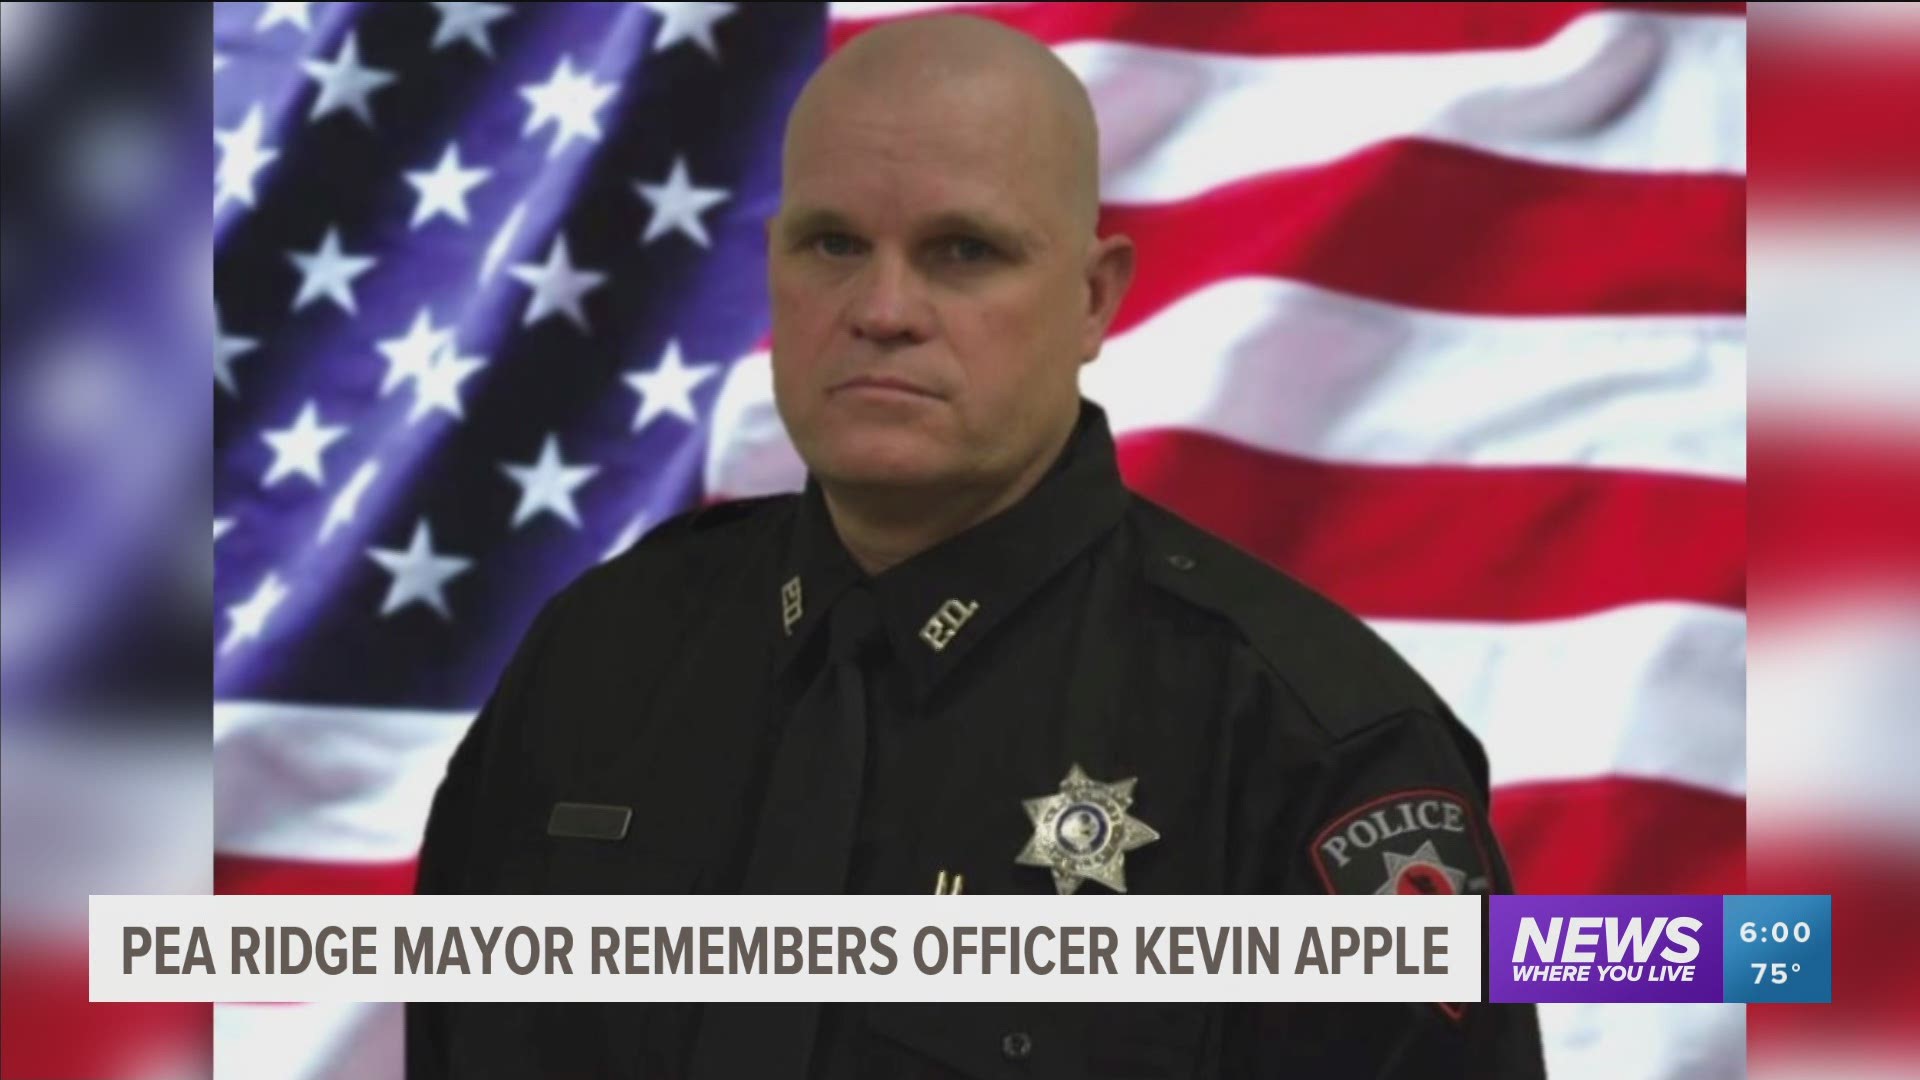 Pea Ridge Mayor Jackie Crabtree says the city is still trying to make sense of the tragic loss of Officer Apple.